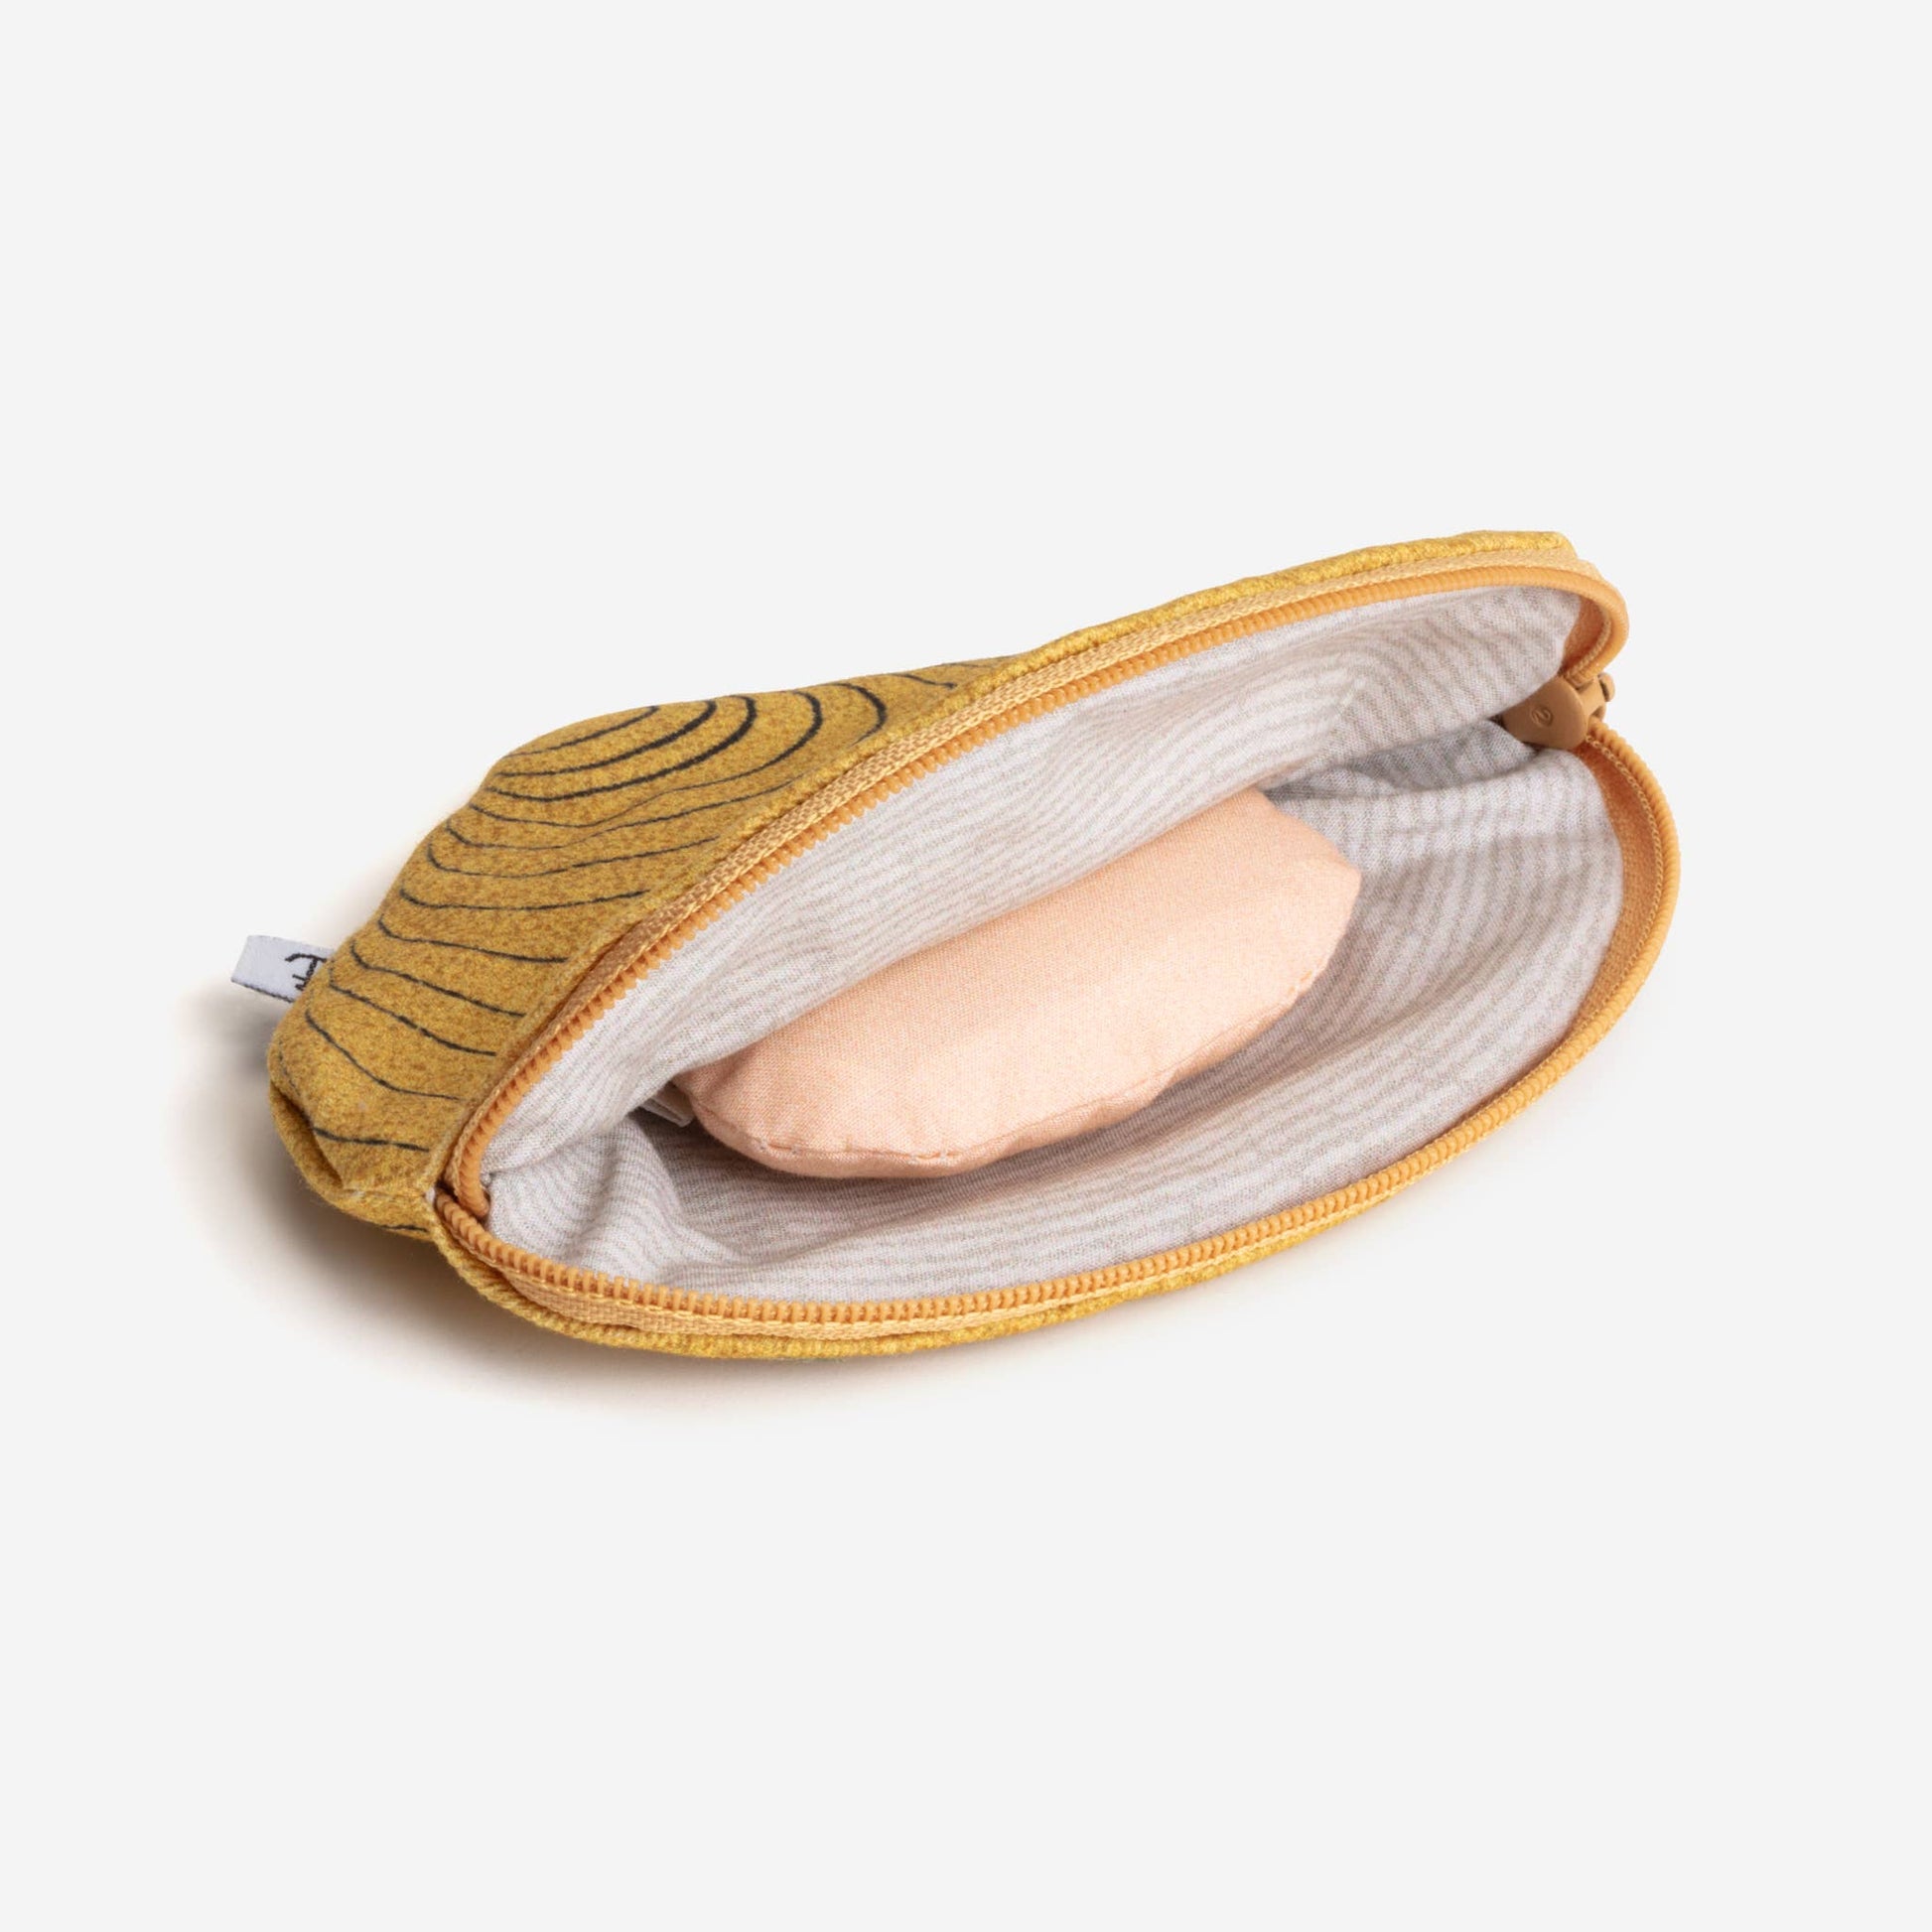 Interior of mustard colored clam shell